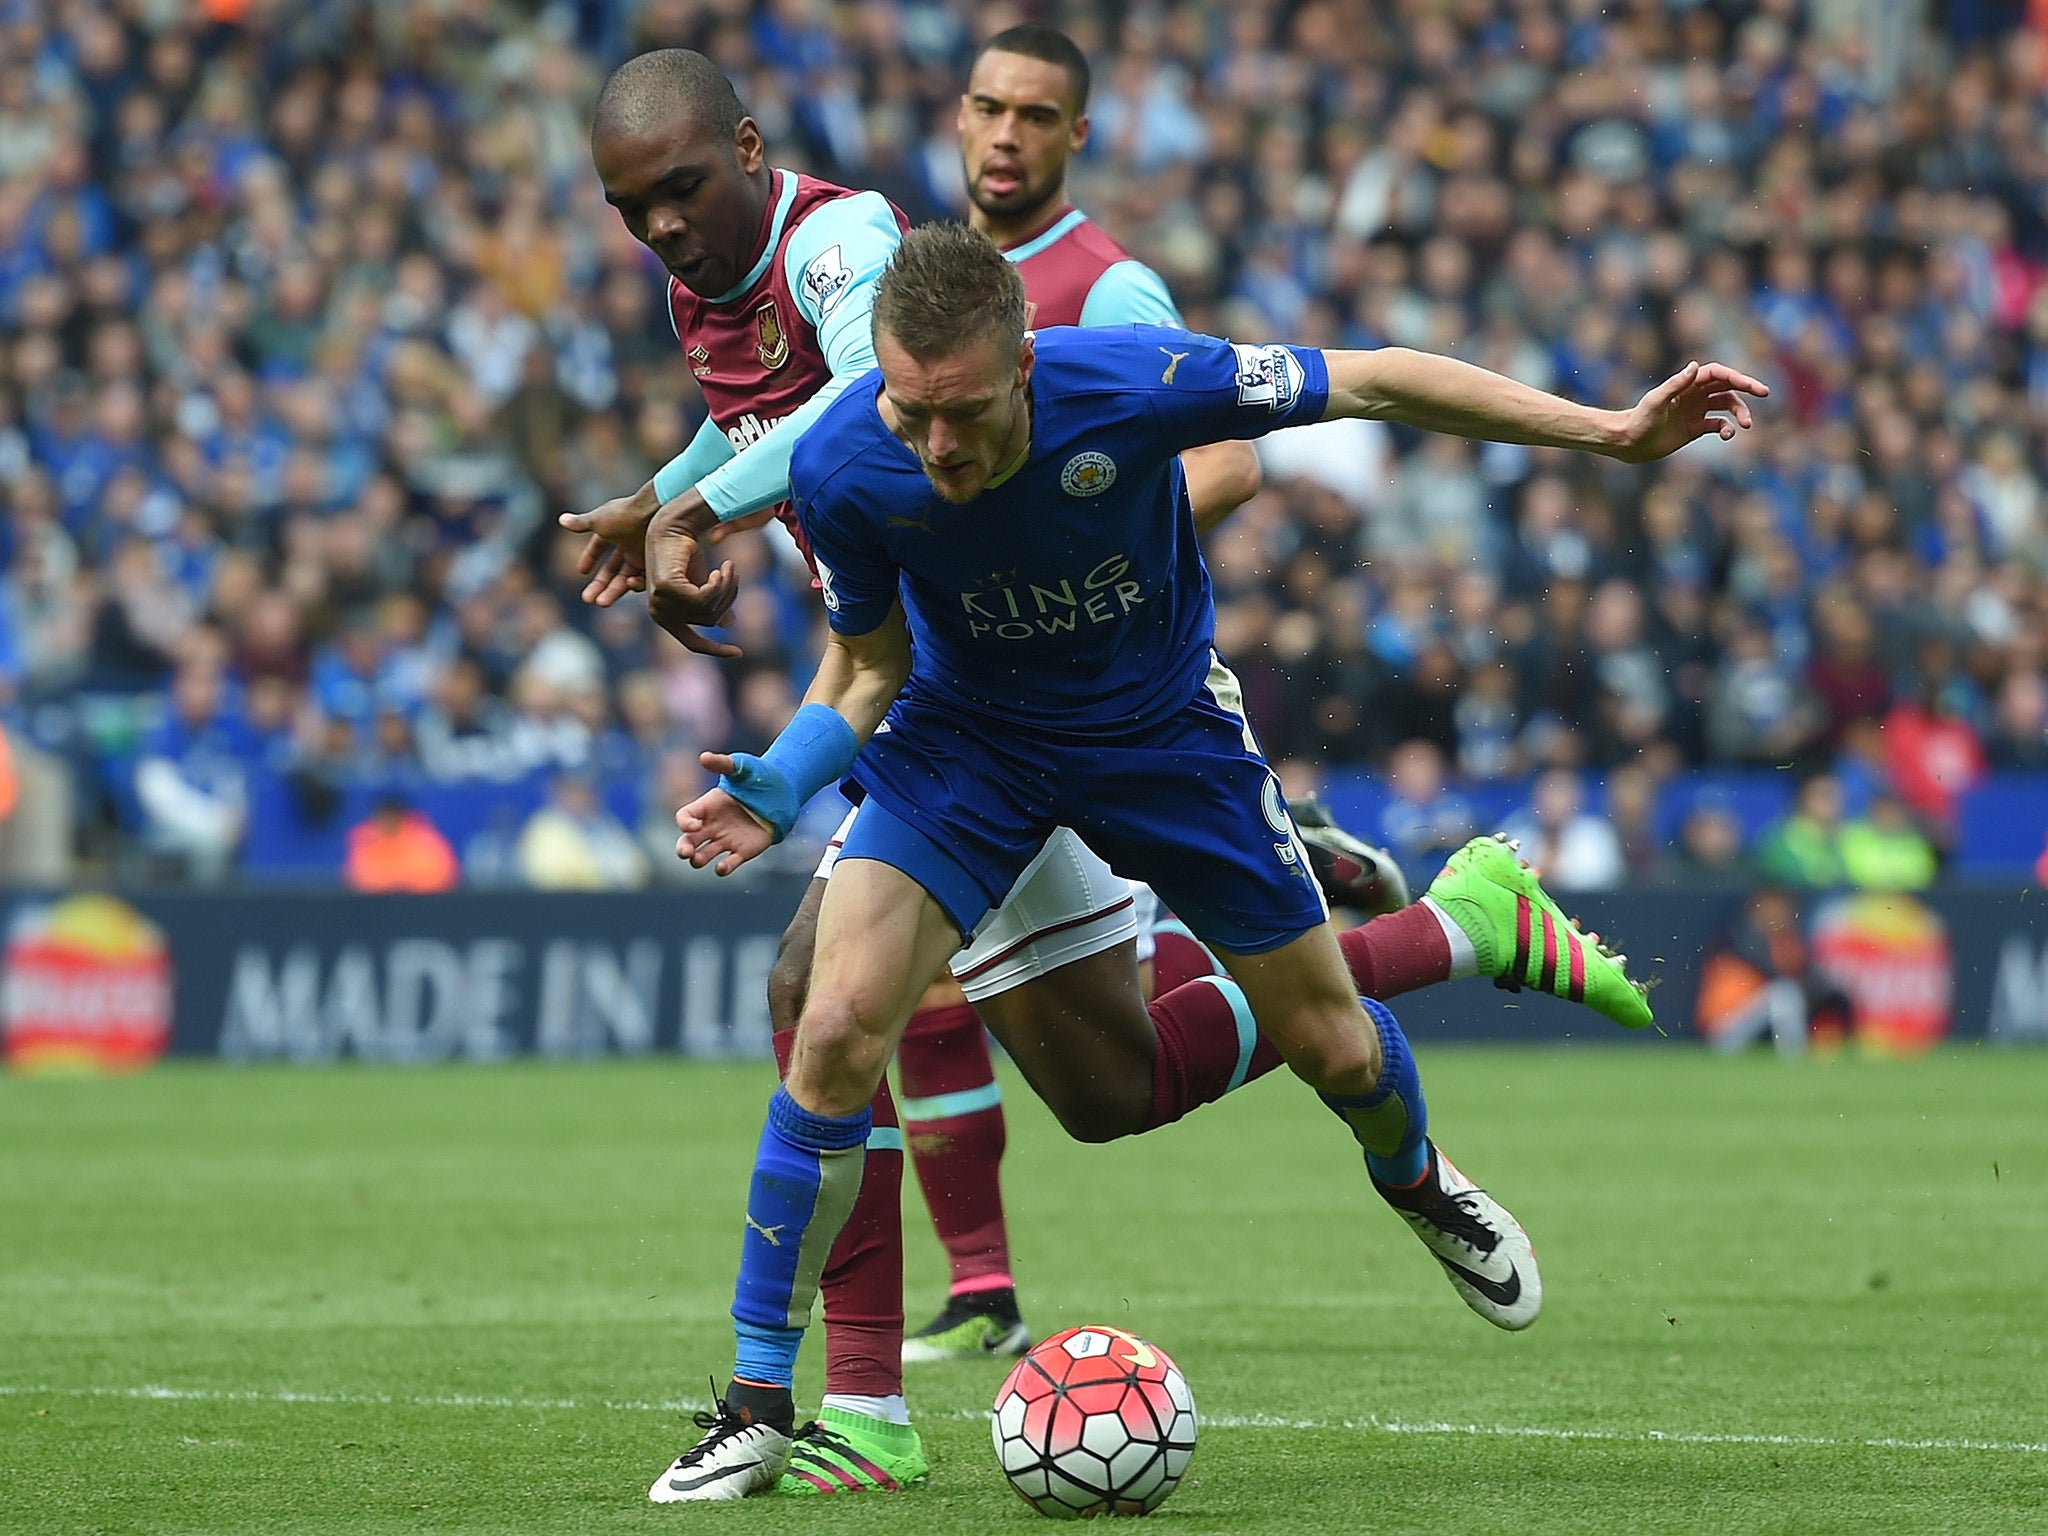 Jamie Vardy was guilty of diving that saw him receive a second yellow card and subsequent red card in Leicester's 2-2 draw with West Ham (Getty)